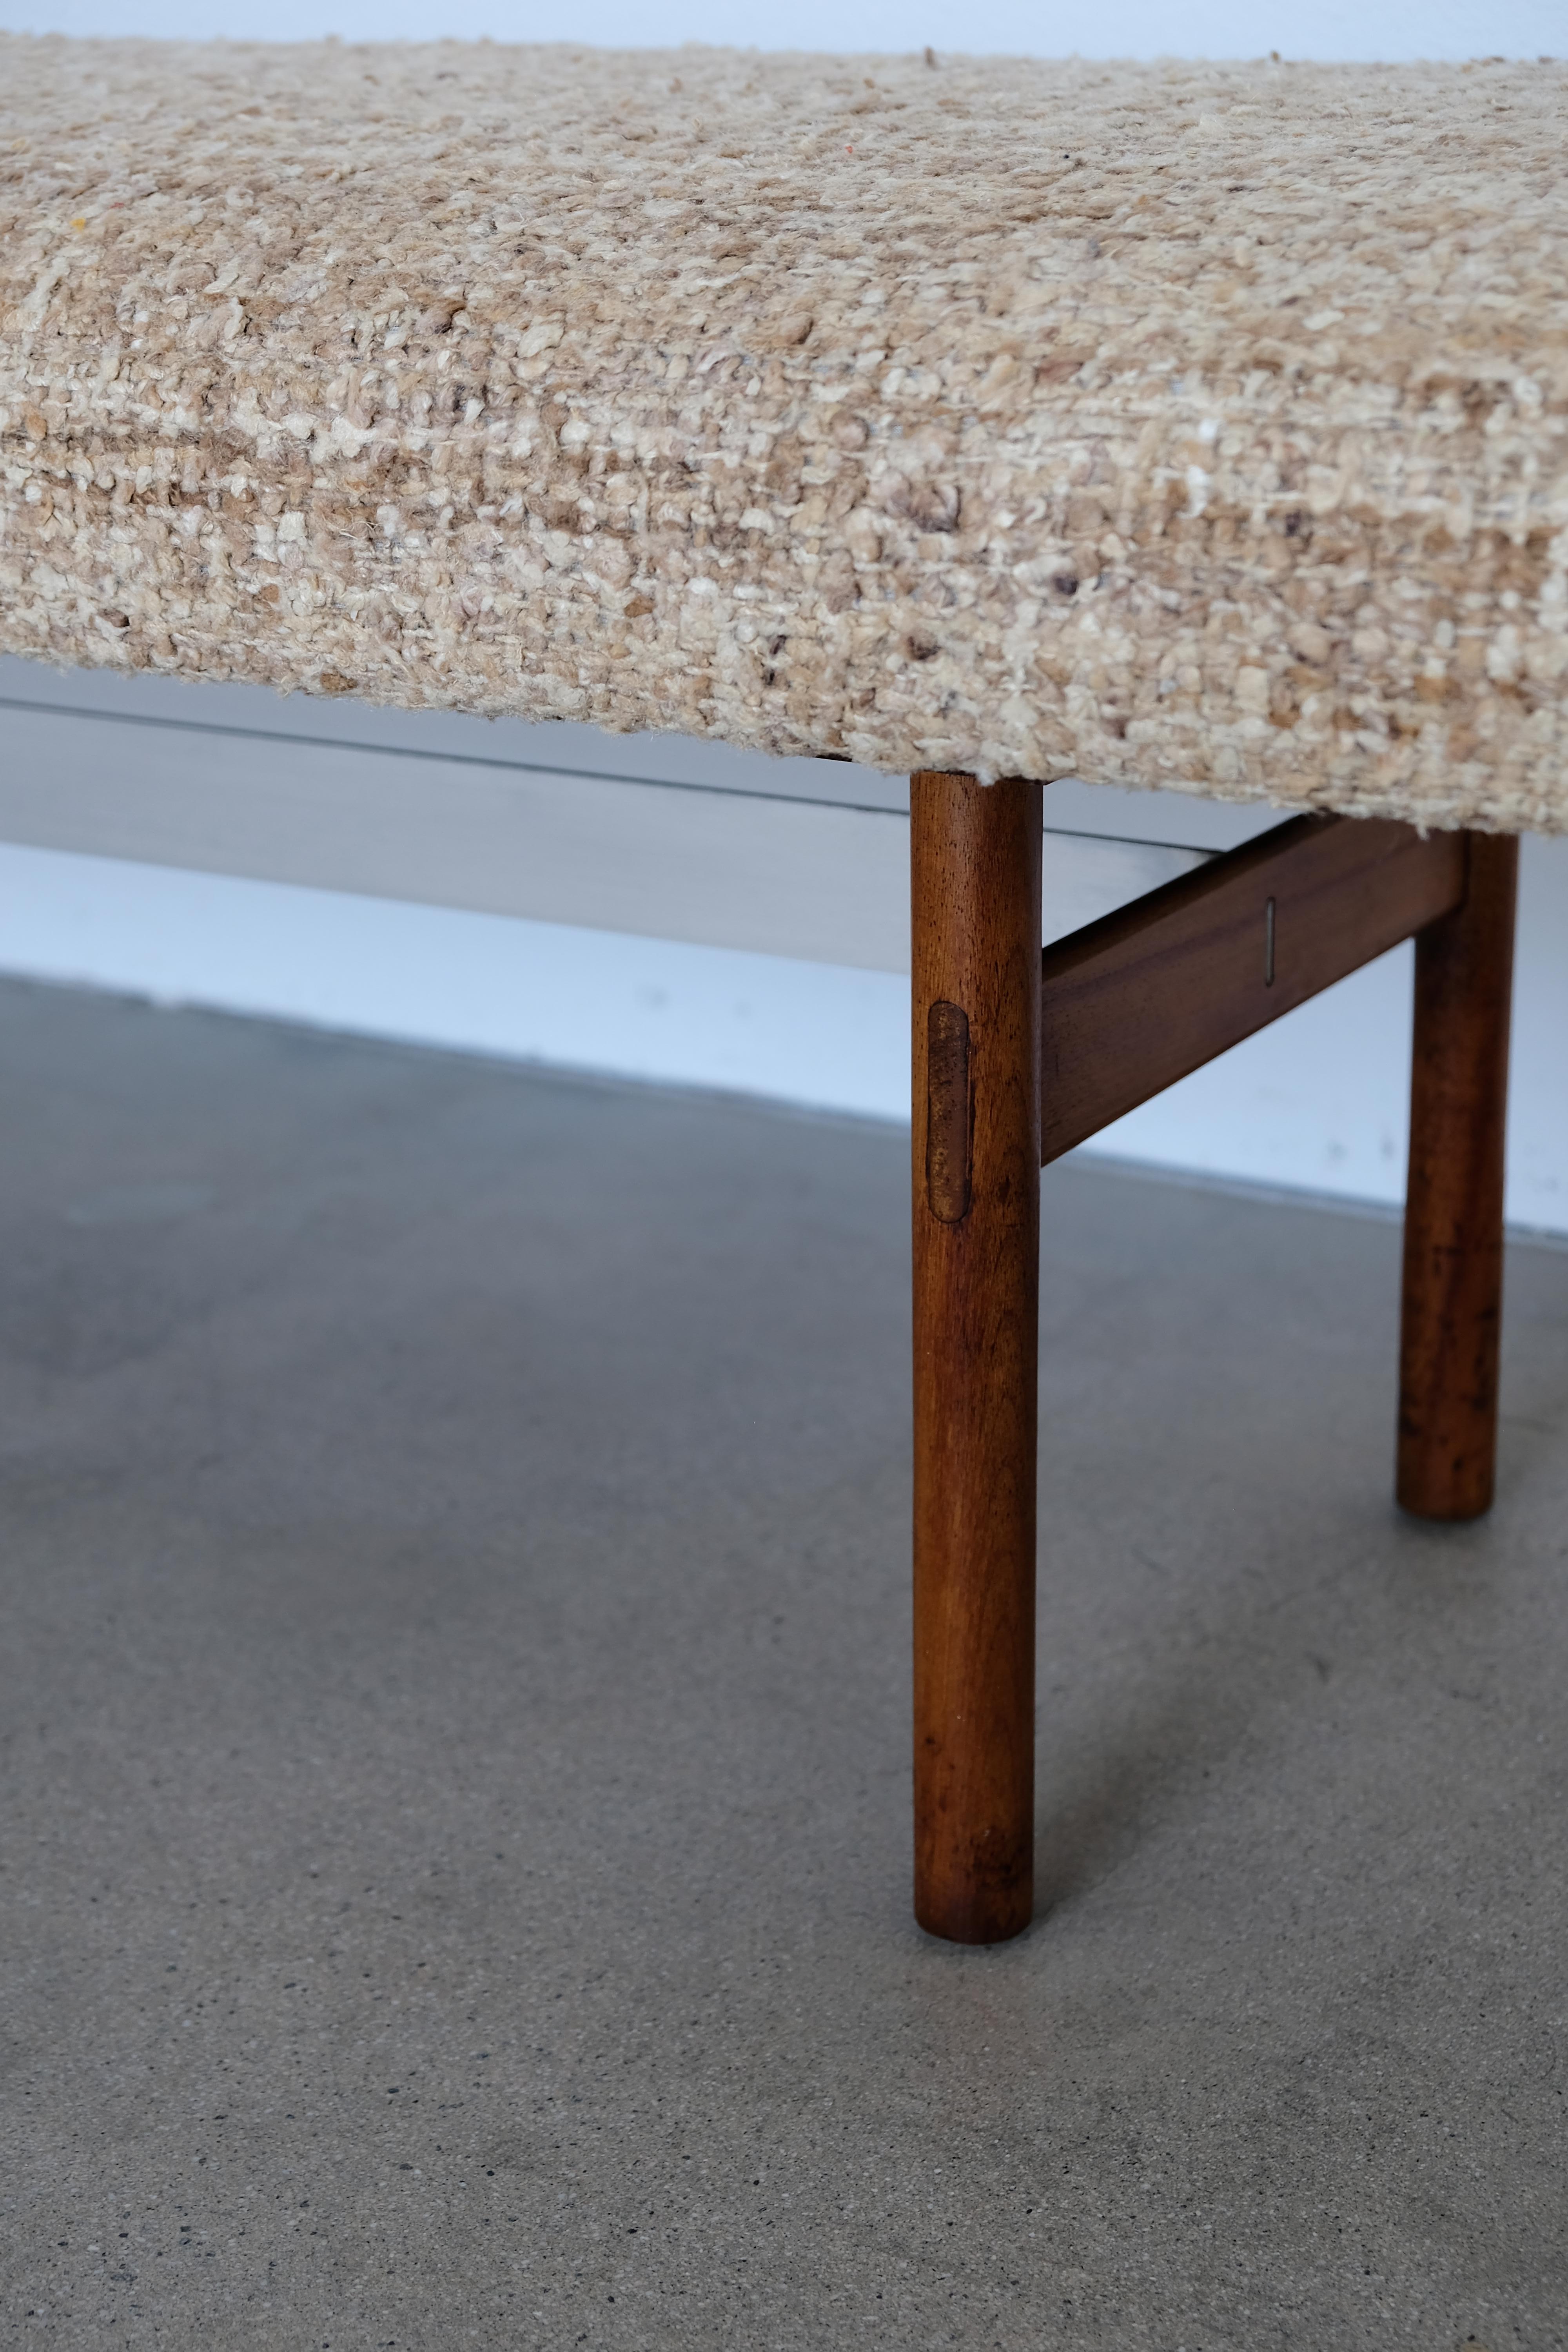 American Midcentury Wood and Aluminum Bench with Woven Nubby Natural Tweed Fabric